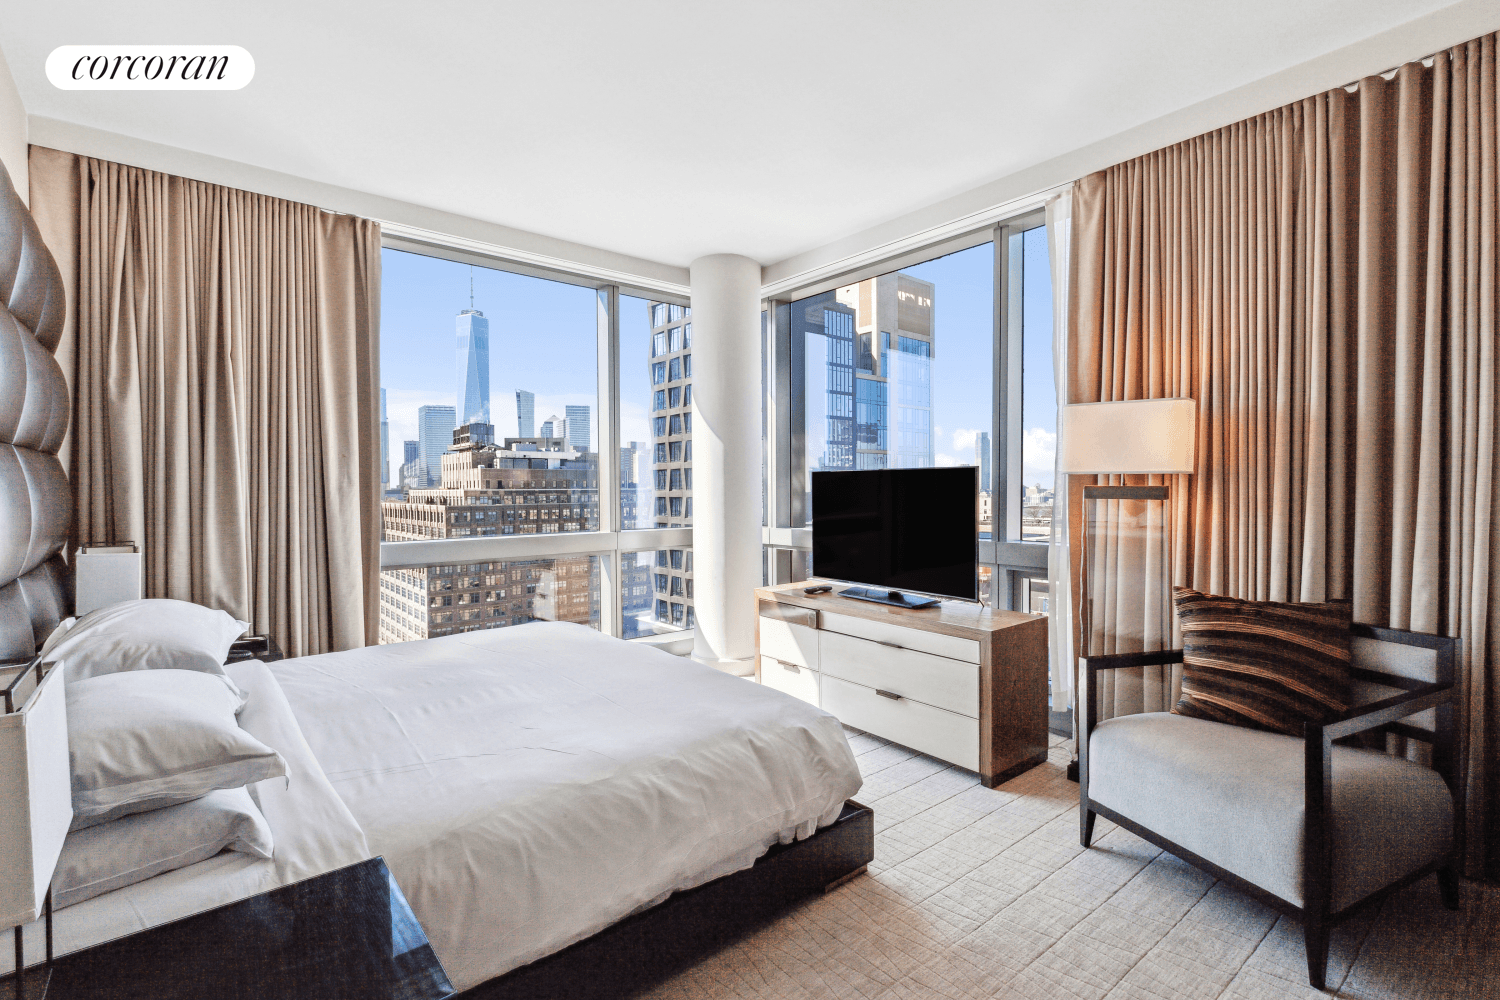 Exceptional Pied a Terre Investment Opportunity in SoHo Stunning Views Luxury Living at the Dominick HotelEnjoy up to 120 days a year and generate income for the remainder of the ...